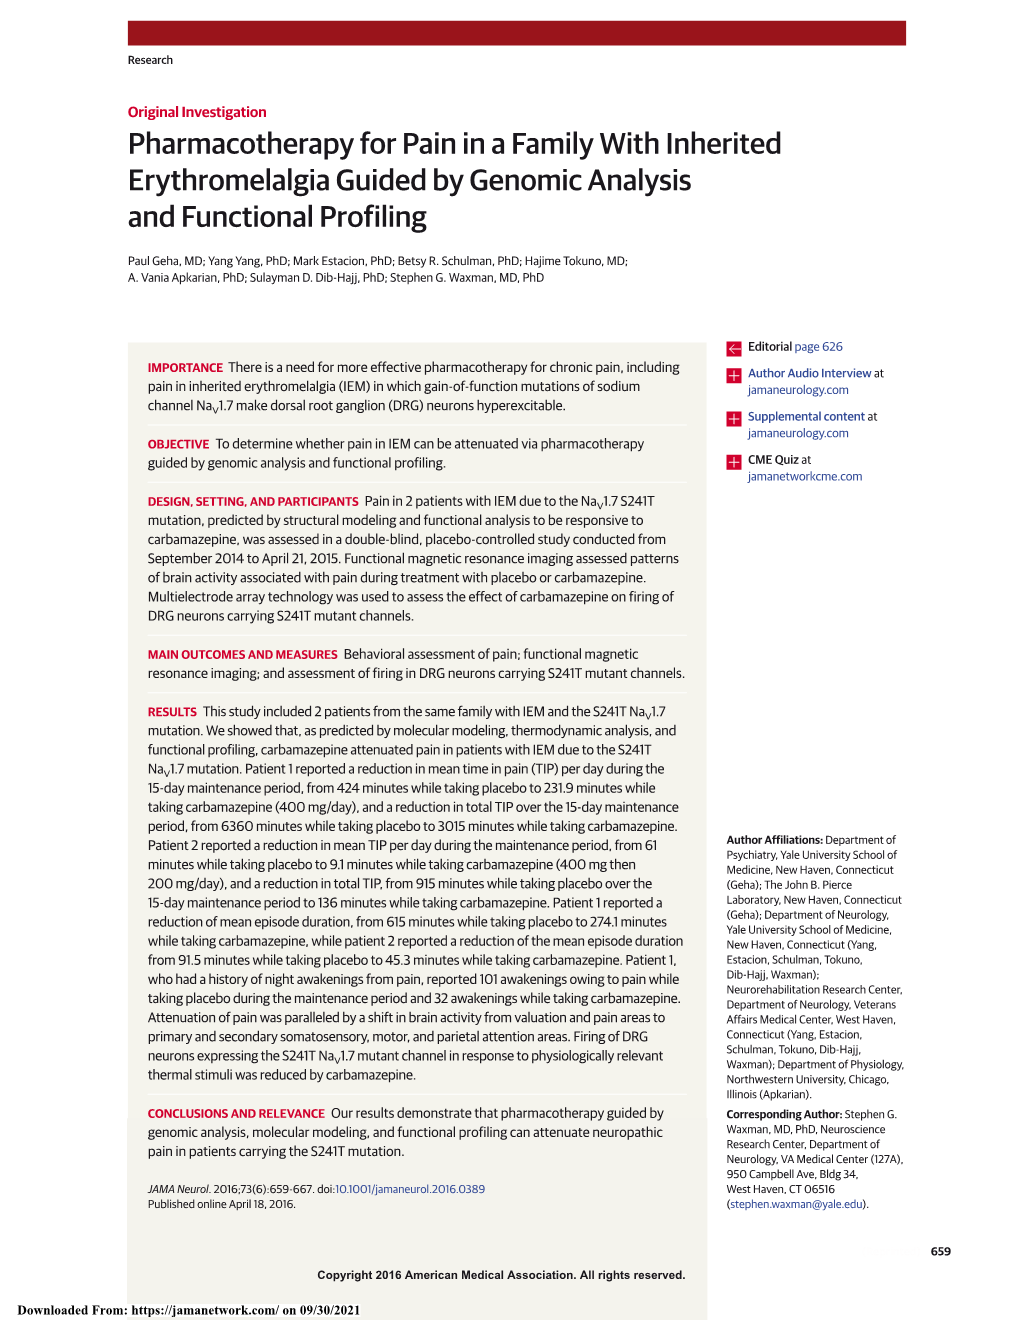 Pharmacotherapy for Pain in a Family with Inherited Erythromelalgia Guided by Genomic Analysis and Functional Profiling